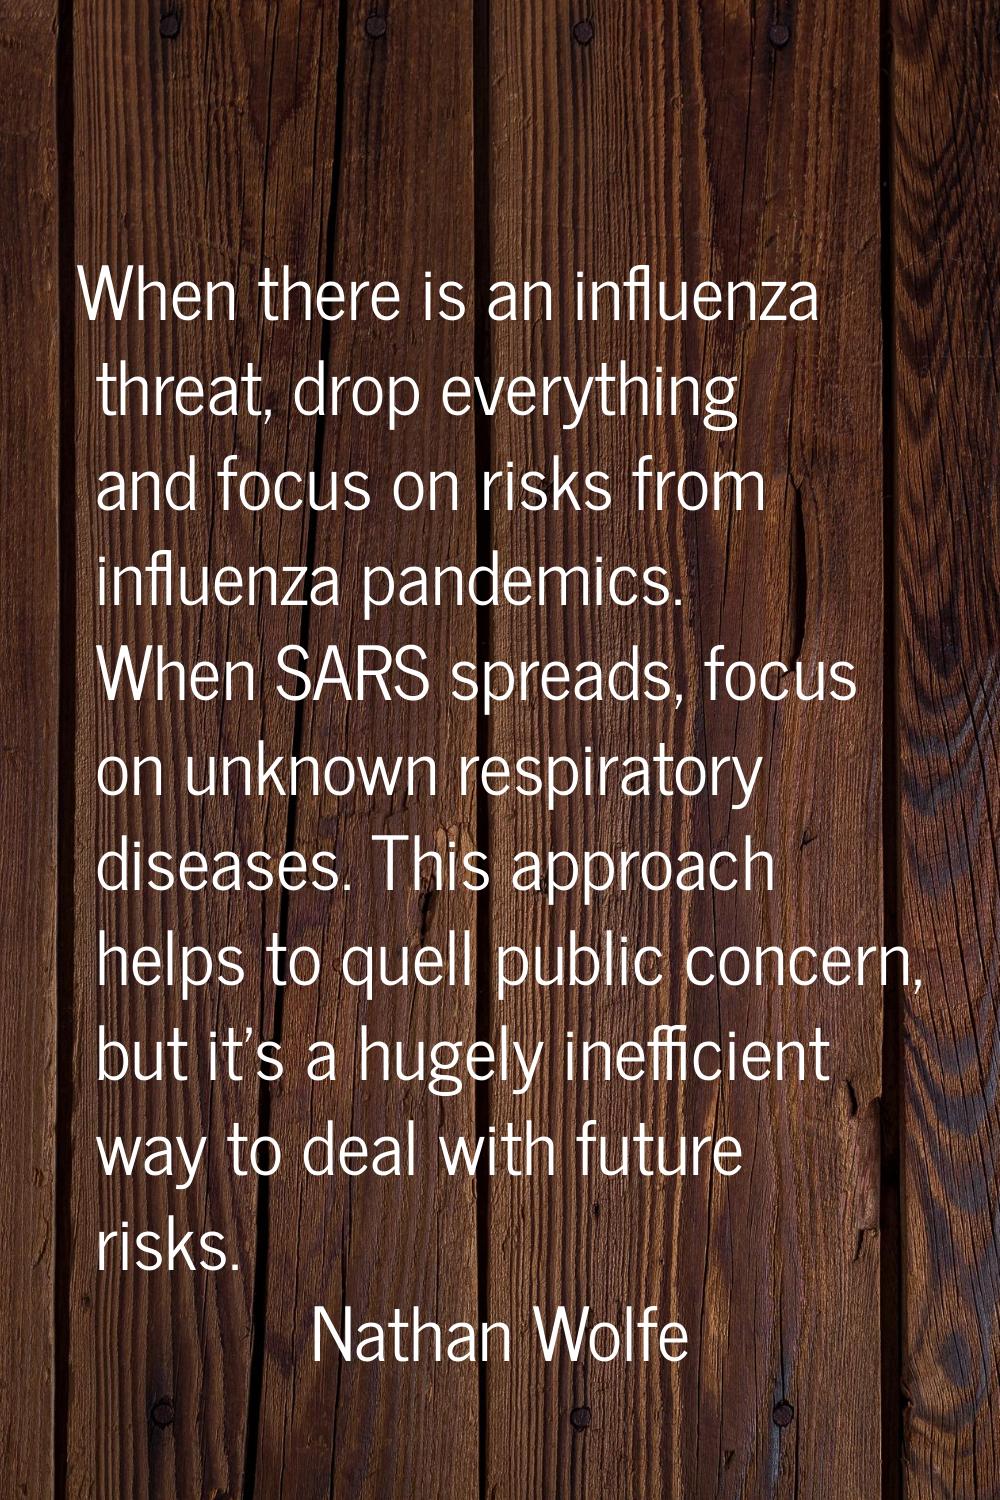 When there is an influenza threat, drop everything and focus on risks from influenza pandemics. Whe